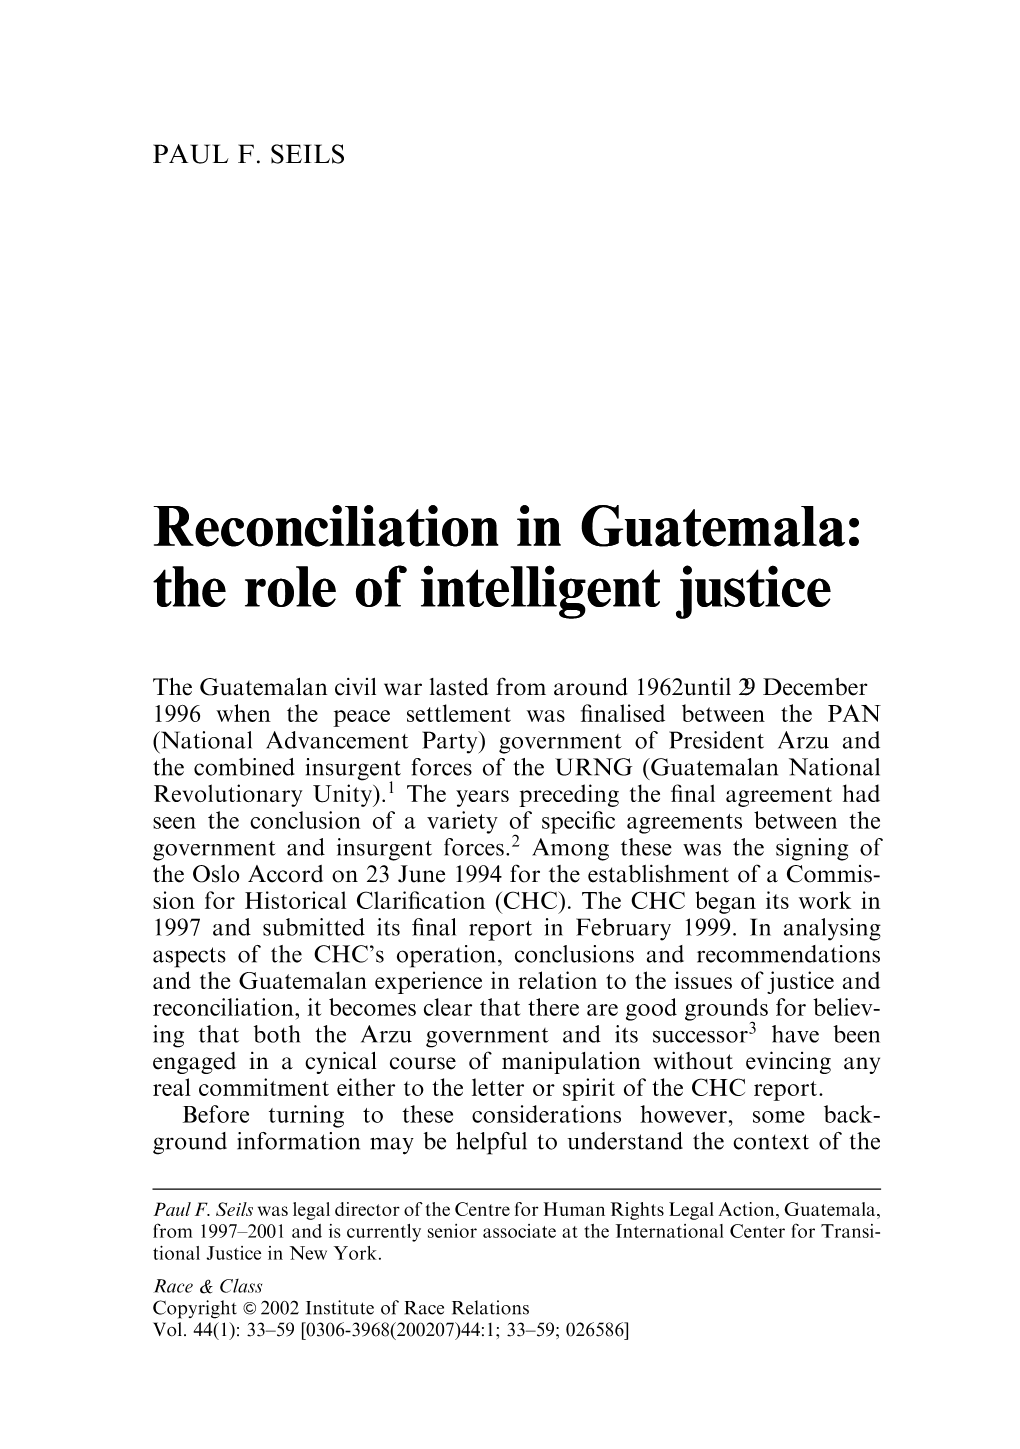 Reconciliation in Guatemala: the Role of Intelligent Justice